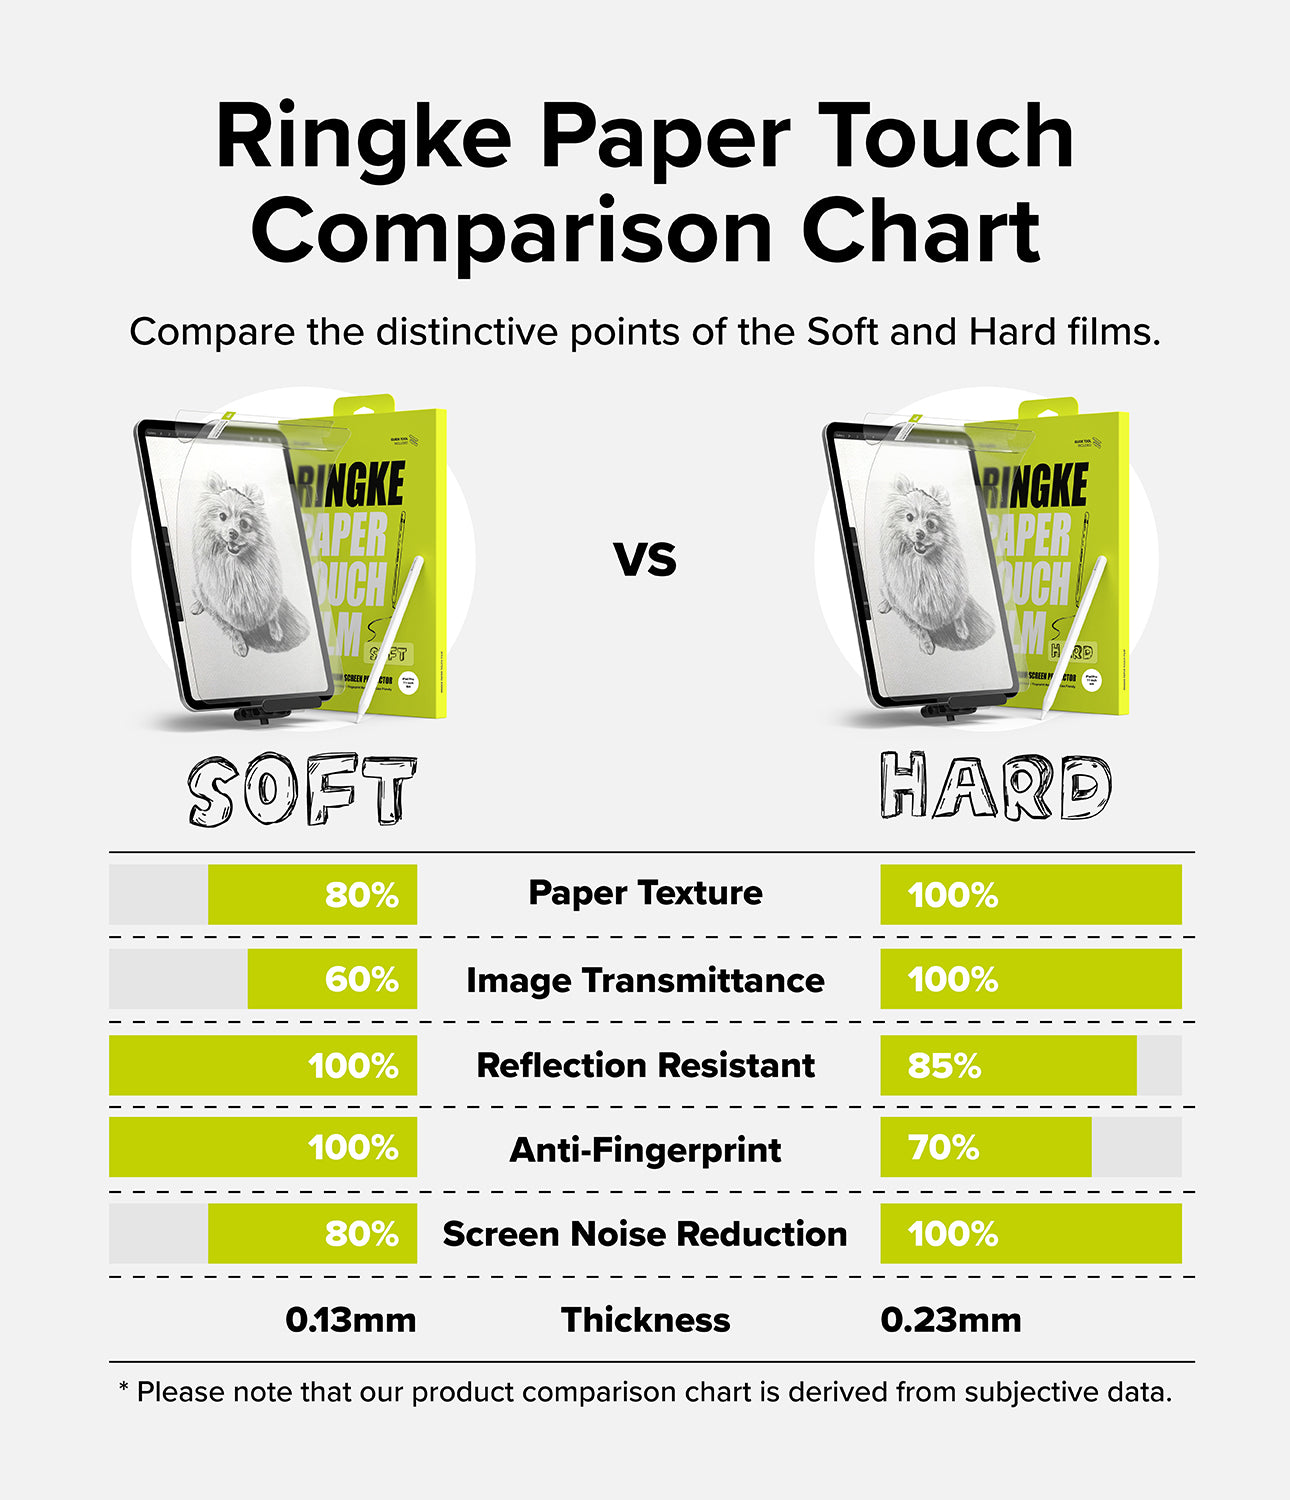 iPad Pro 11" (M4) Screen Protector | Paper Touch Film - Soft - Ringke Paper Touch Comparison Chart. Compare the distinctive points of the Soft and Hard films.